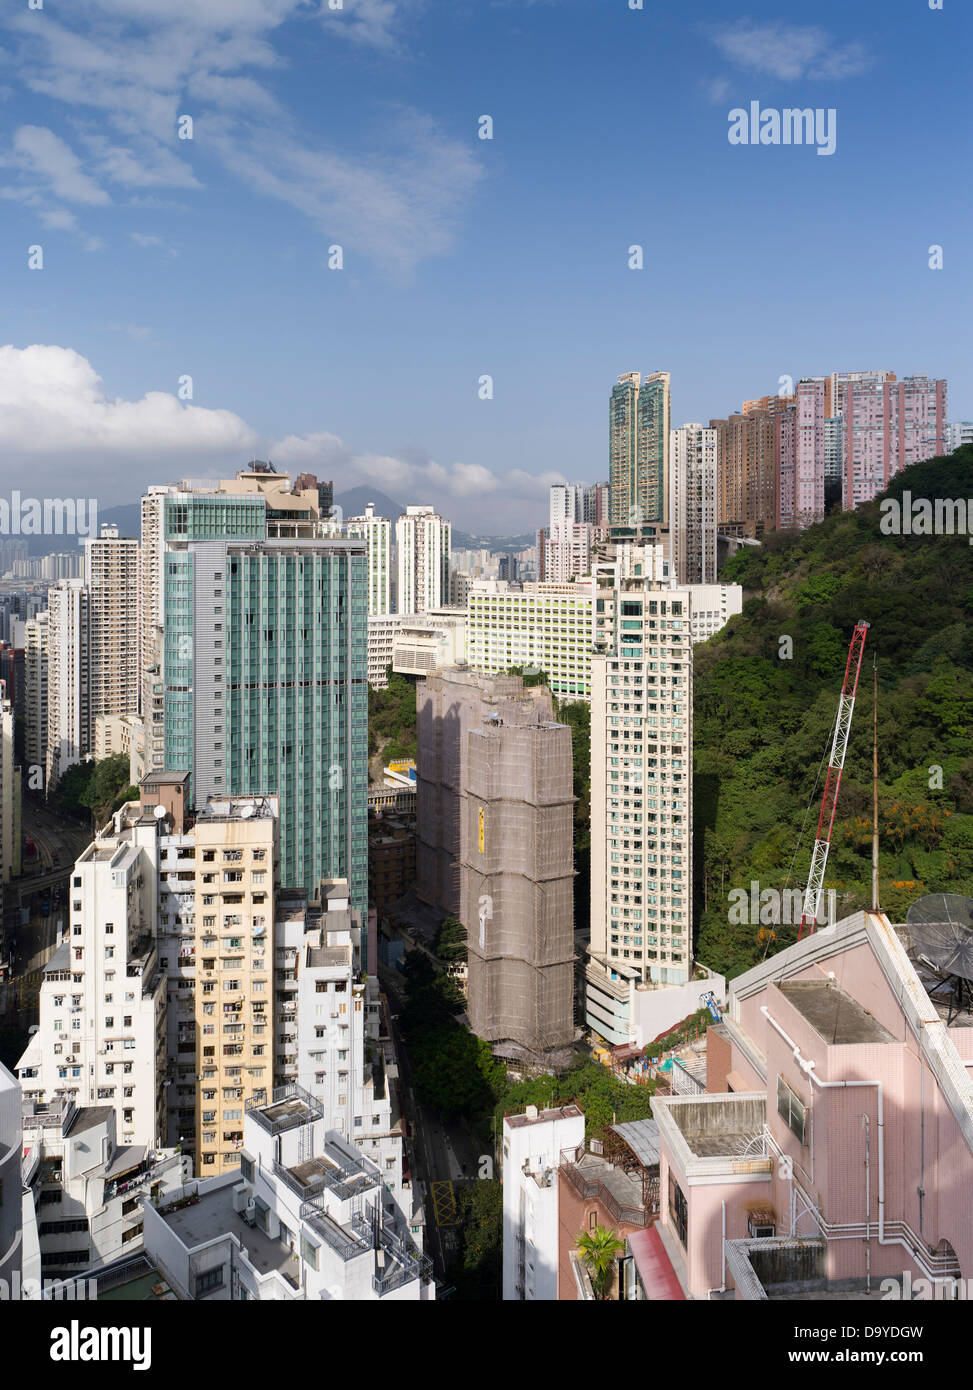 dh  CAUSEWAY BAY HONG KONG Chinese high rise flats residential skyscraper buildings city skyline Stock Photo